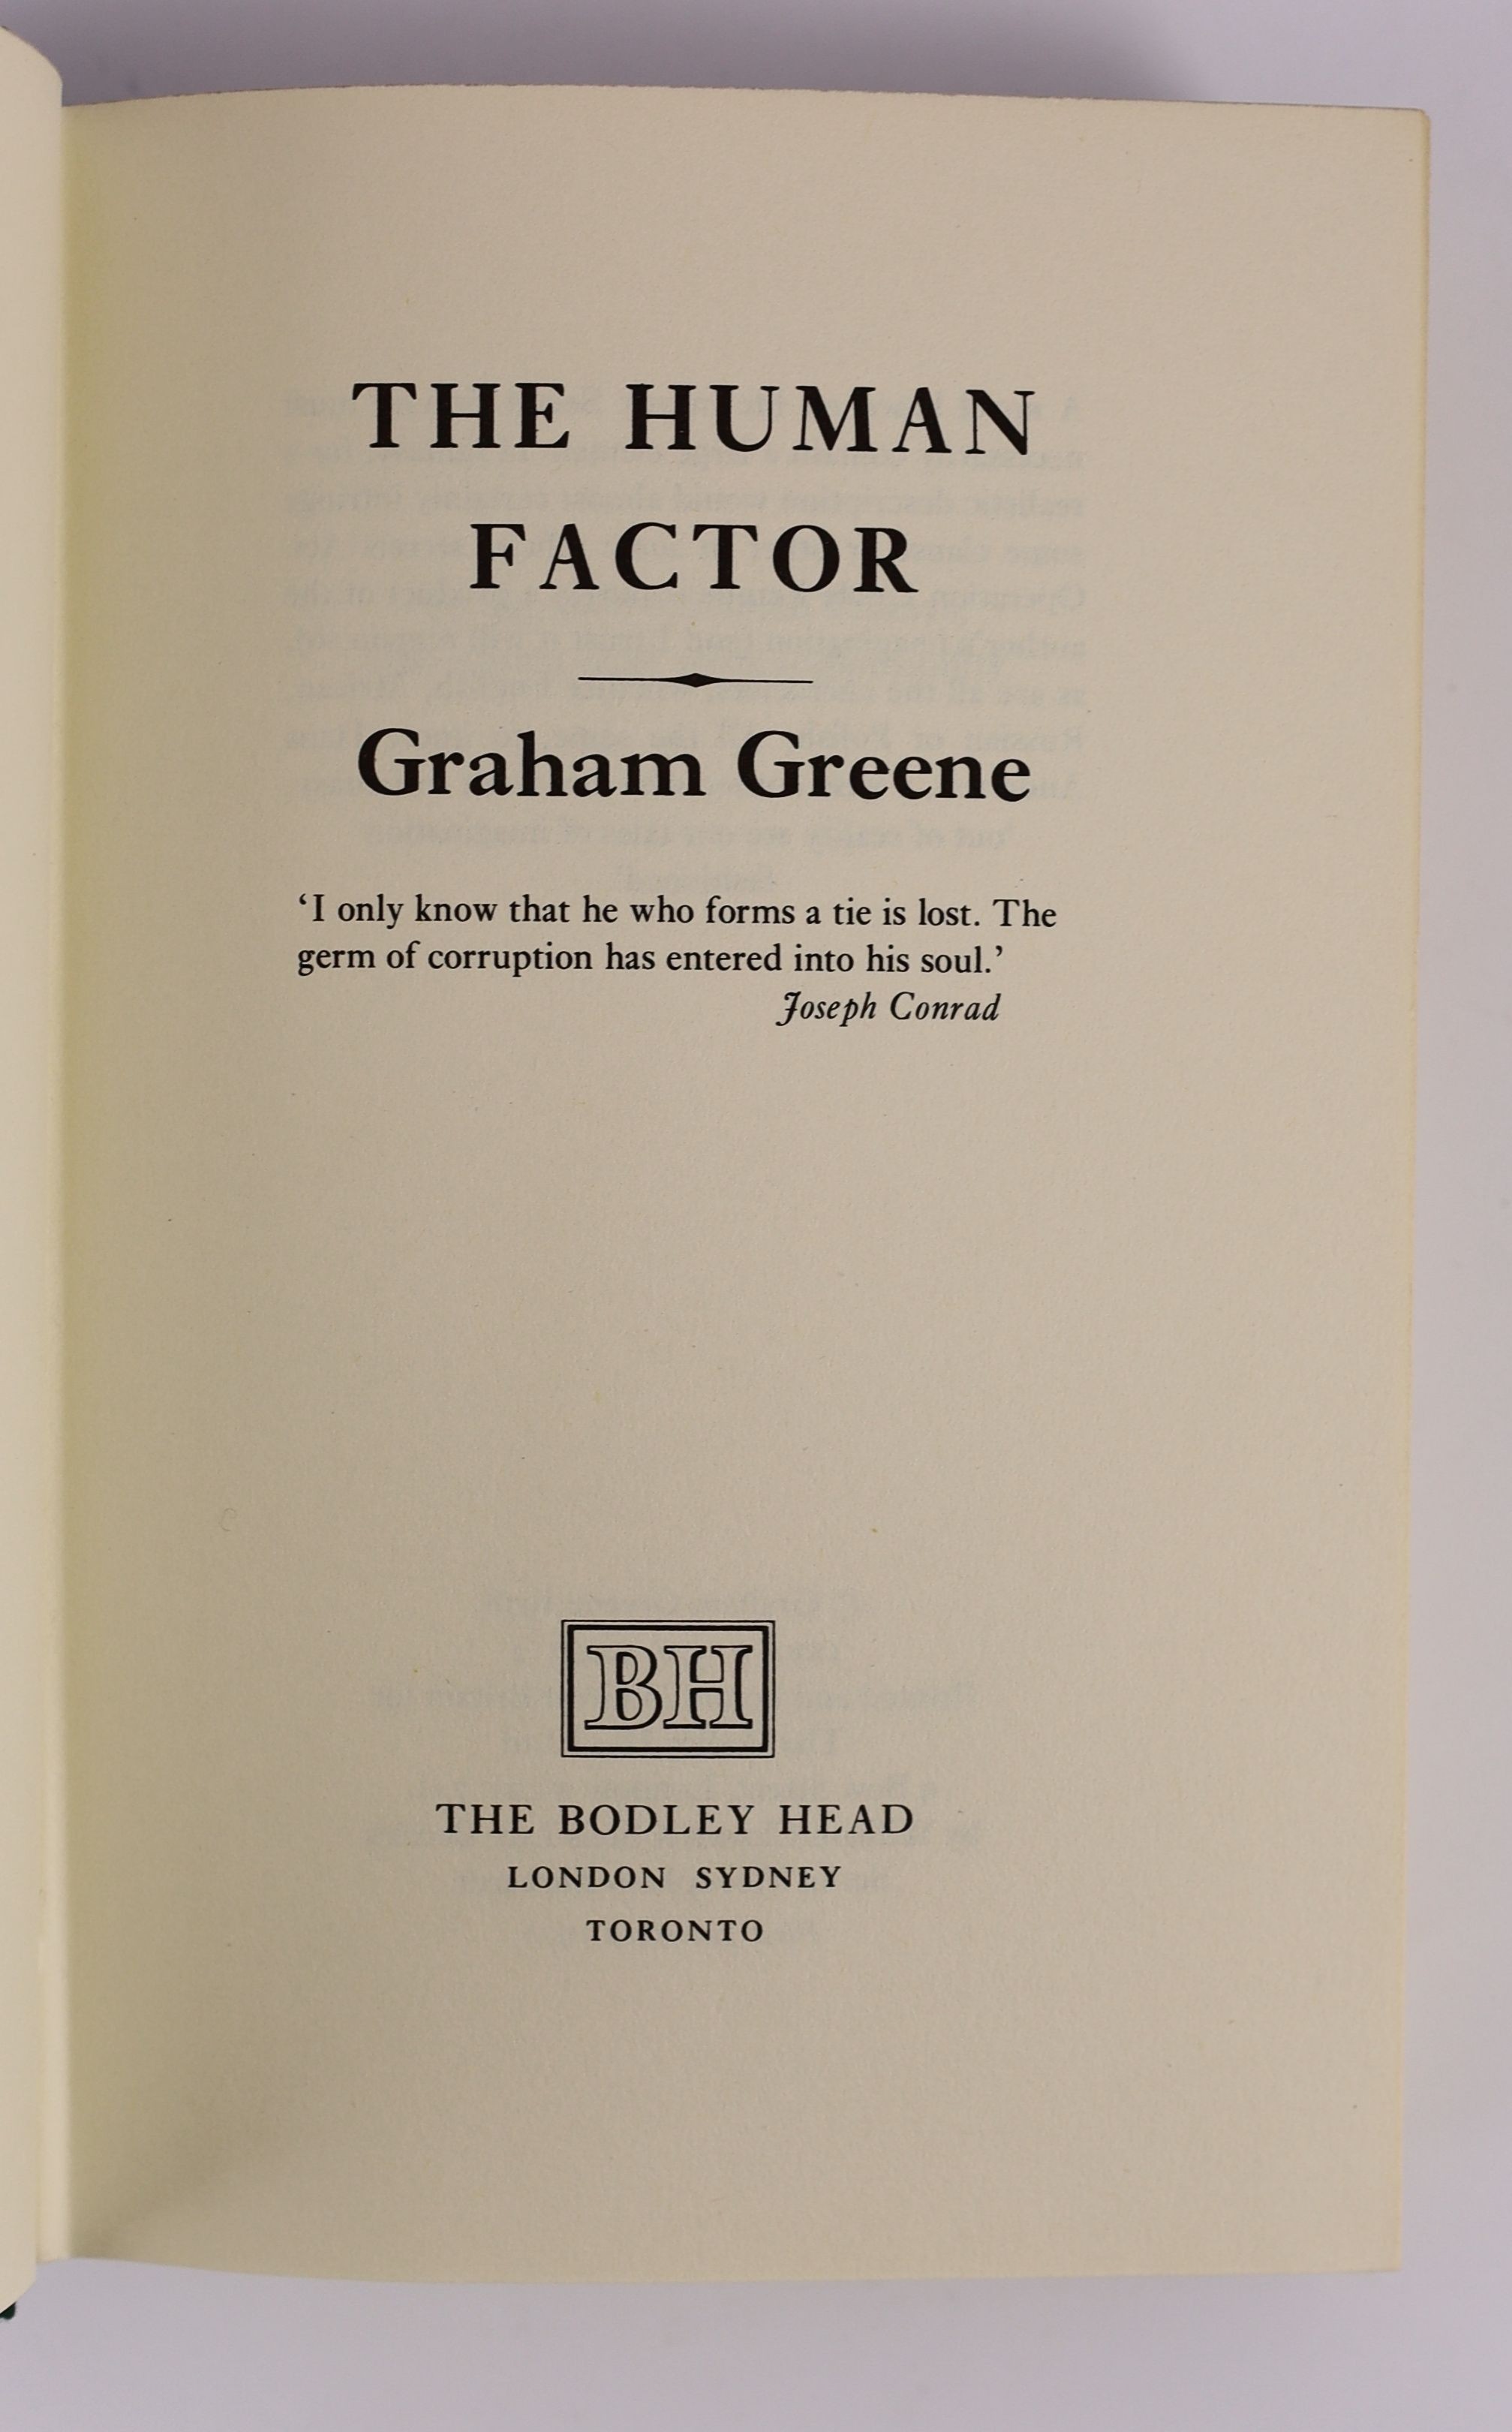 Greene, Graham - The Human Factor, 1st edition, second state, in unclipped d/j, The Bodley Head, London, 1978